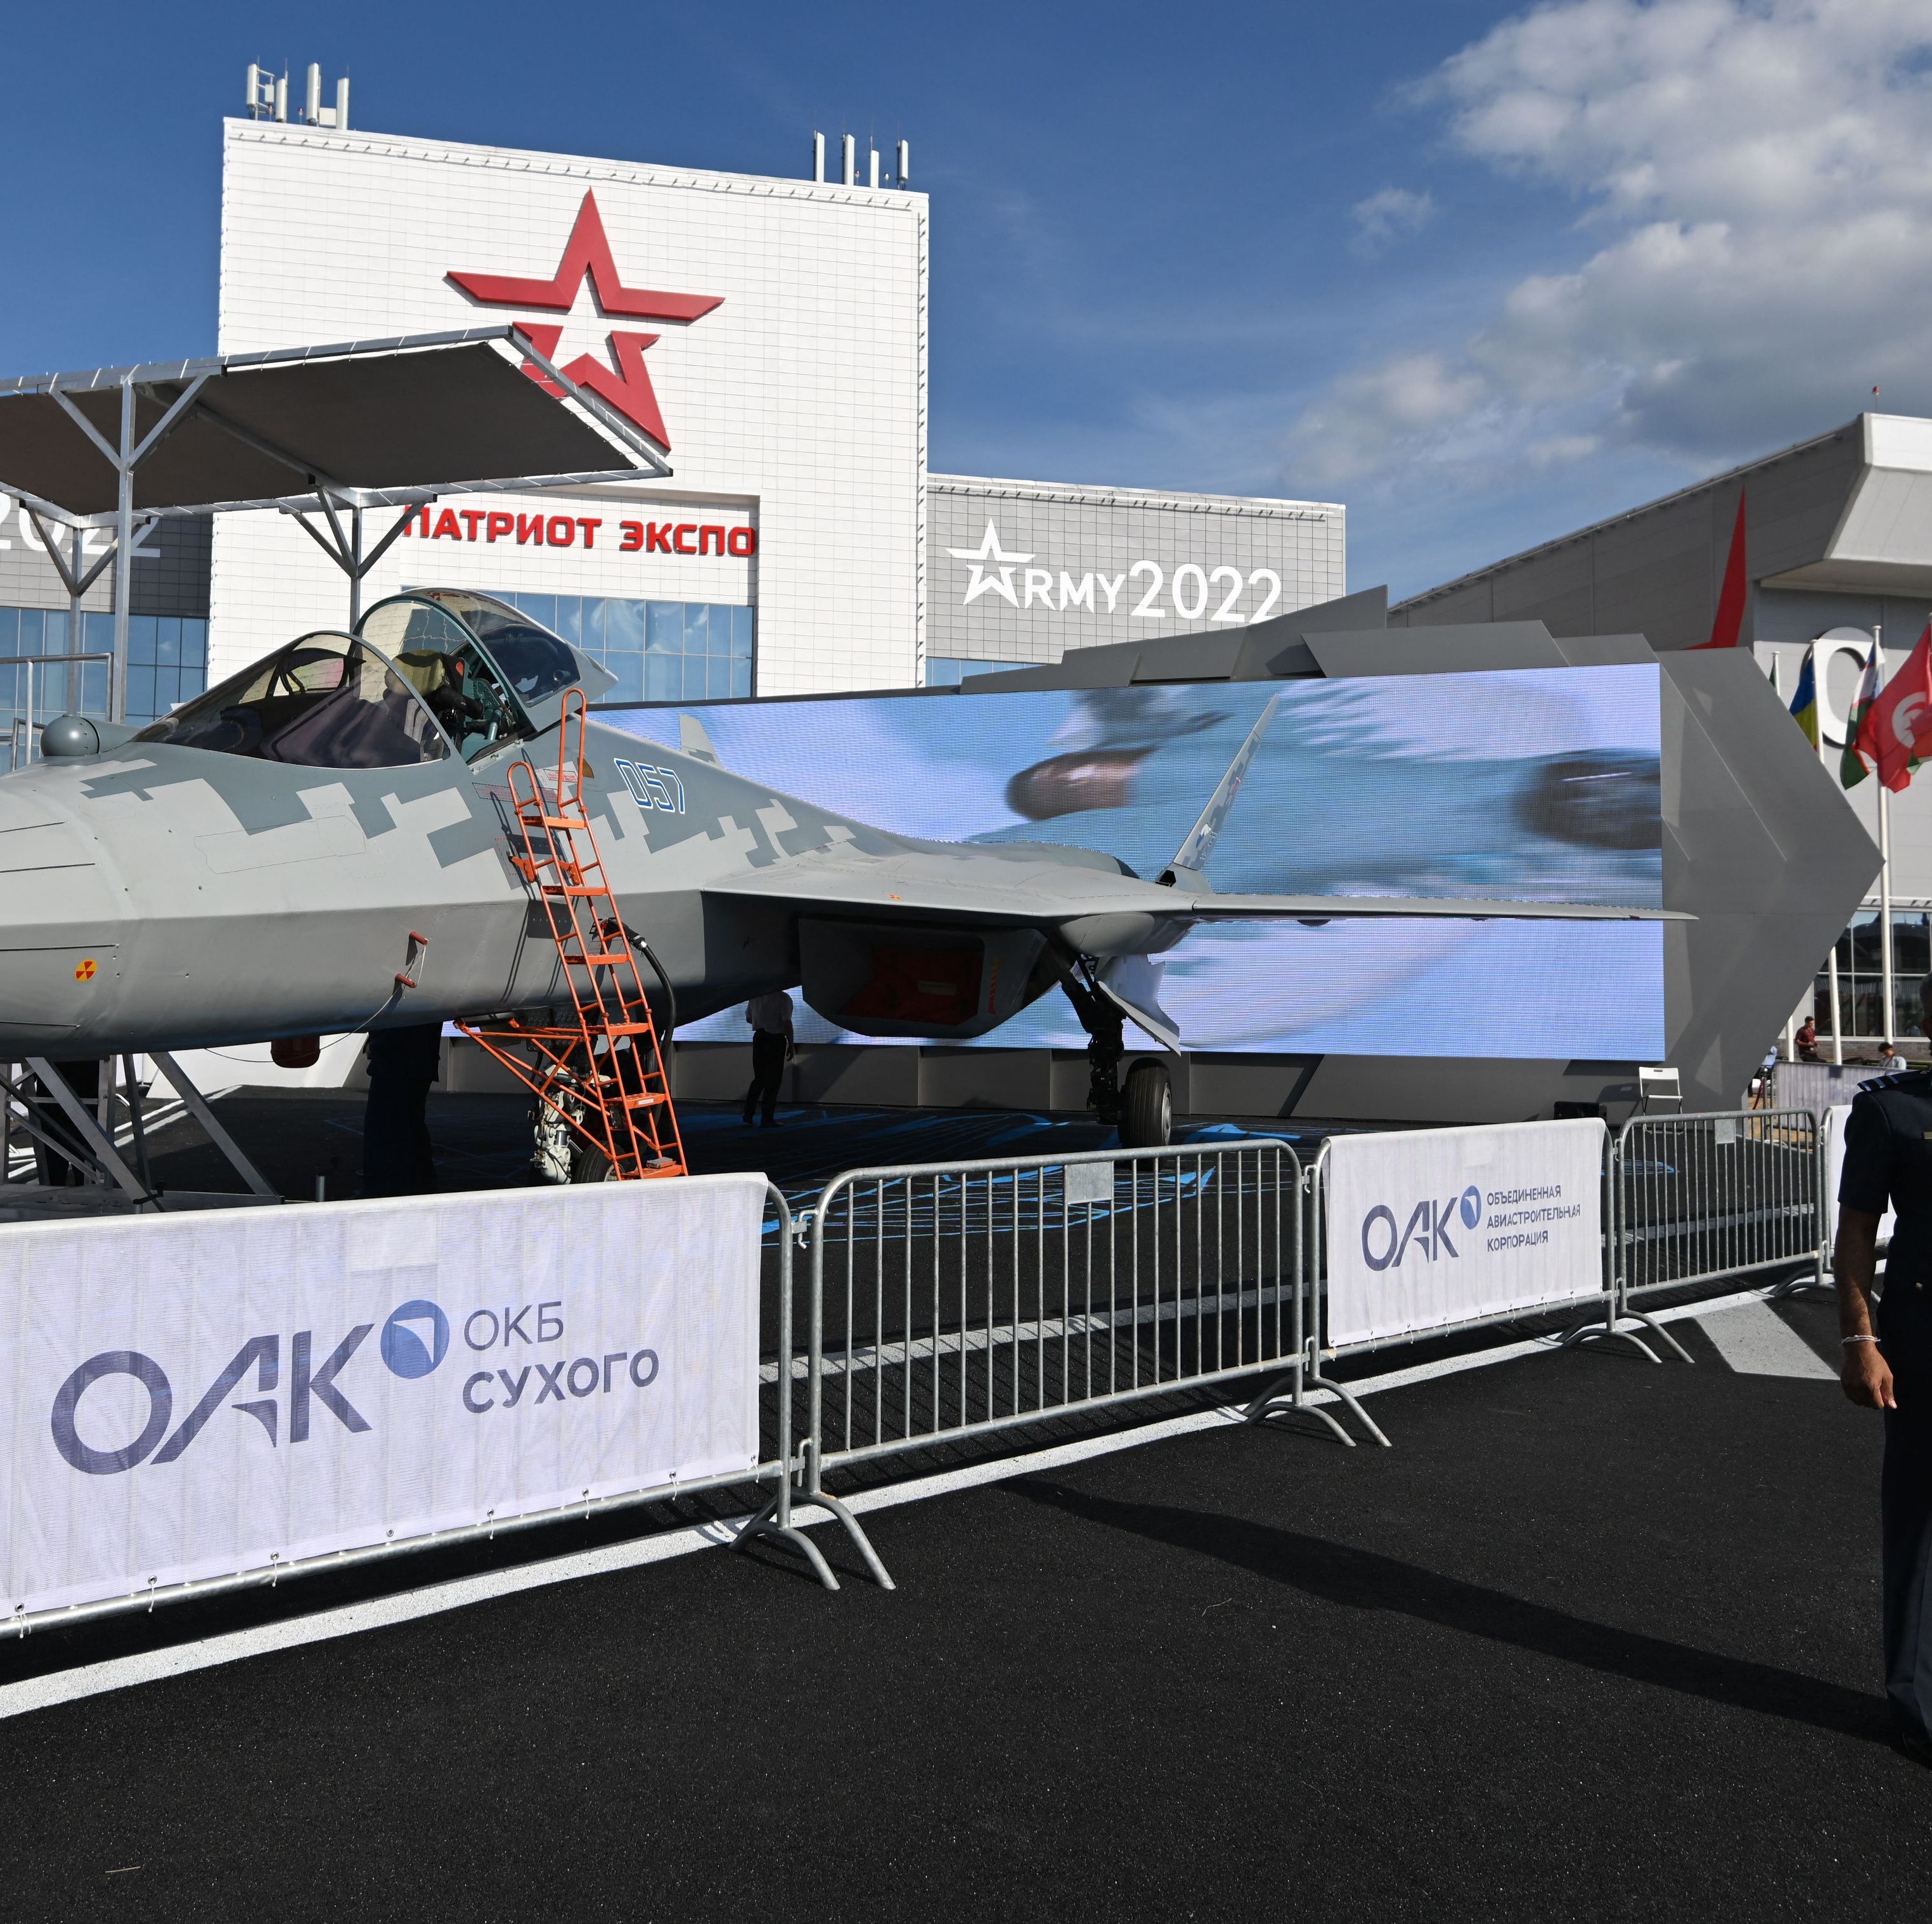 Russia's Recent Army Expo Couldn't Compete With the Reality of Its War in Ukraine